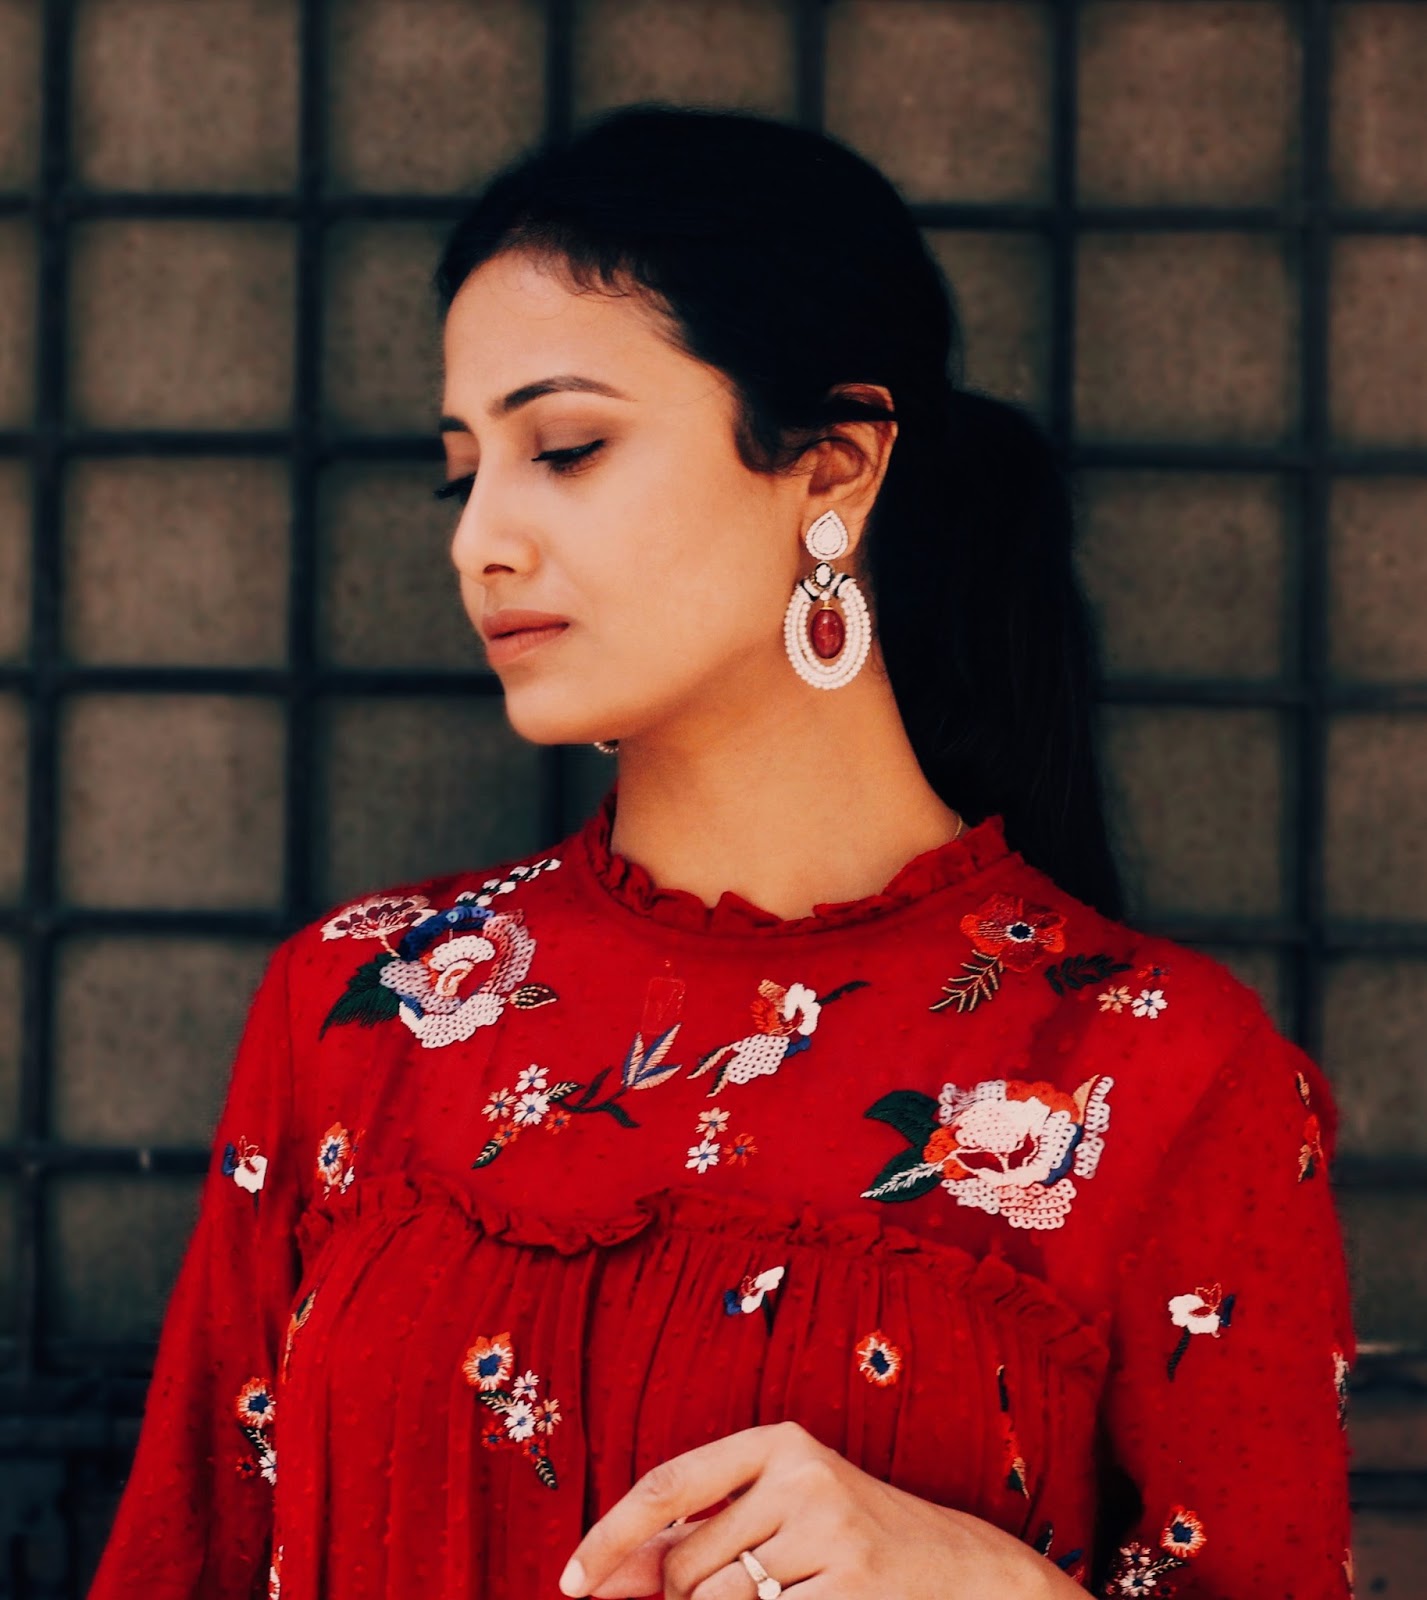 diwali party outfit, red dress, embroidered, tsara, tsara earrings, TSARA review, indian blog, indian fashion blogger, uk blog, zara red dress, earrings, chandelier earrings, silver earrings, destination jewellery